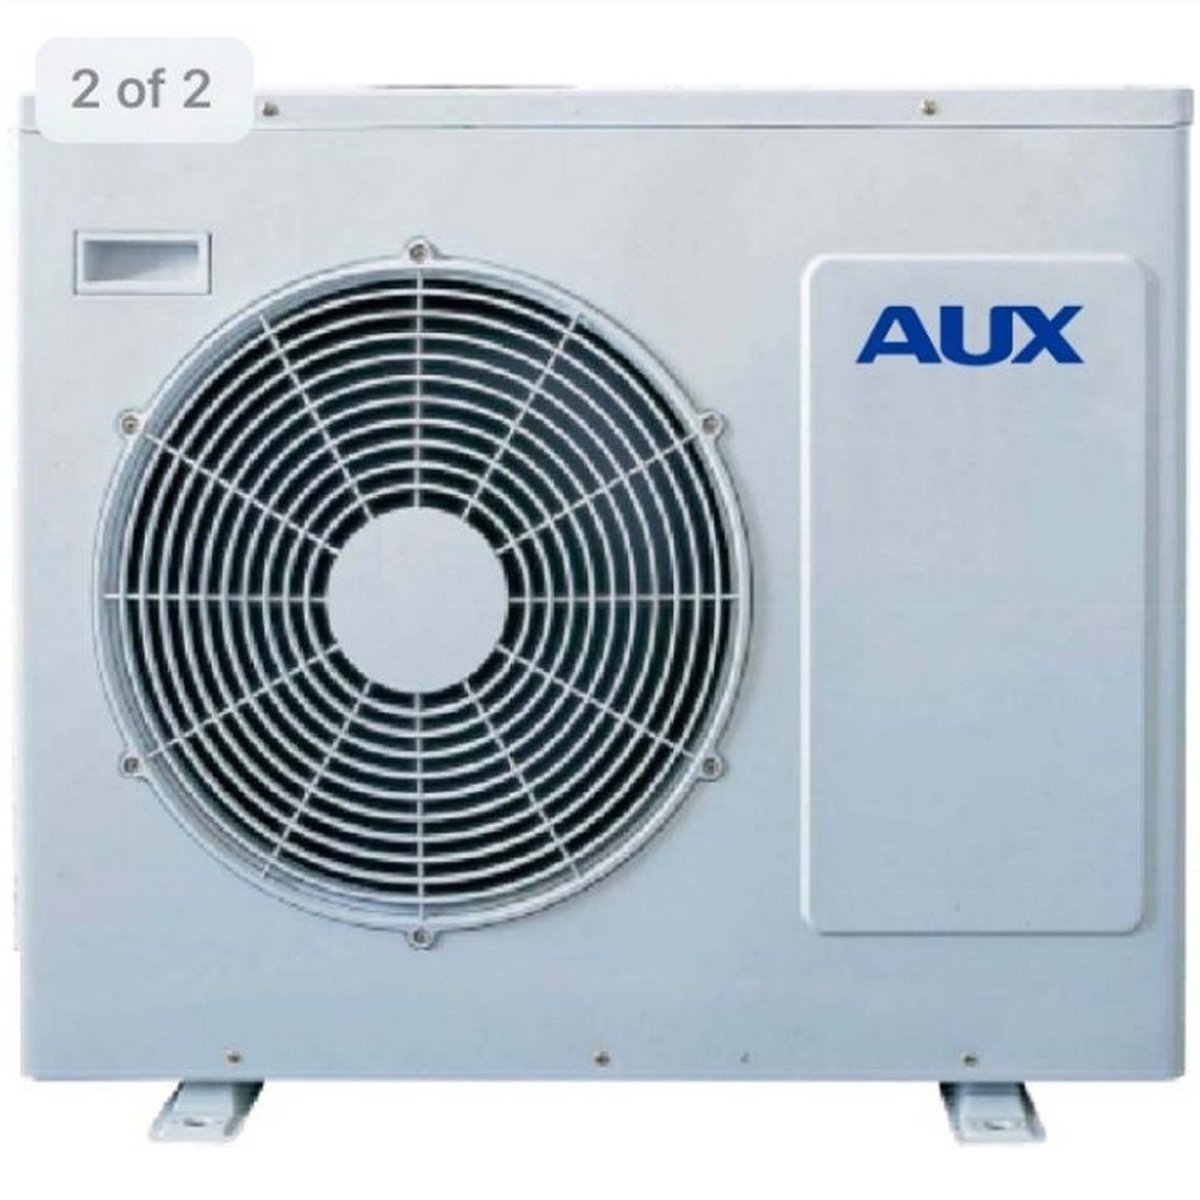 Aux Split Air Conditioner With Inverter Technology ASTWH18A4 1.5Ton